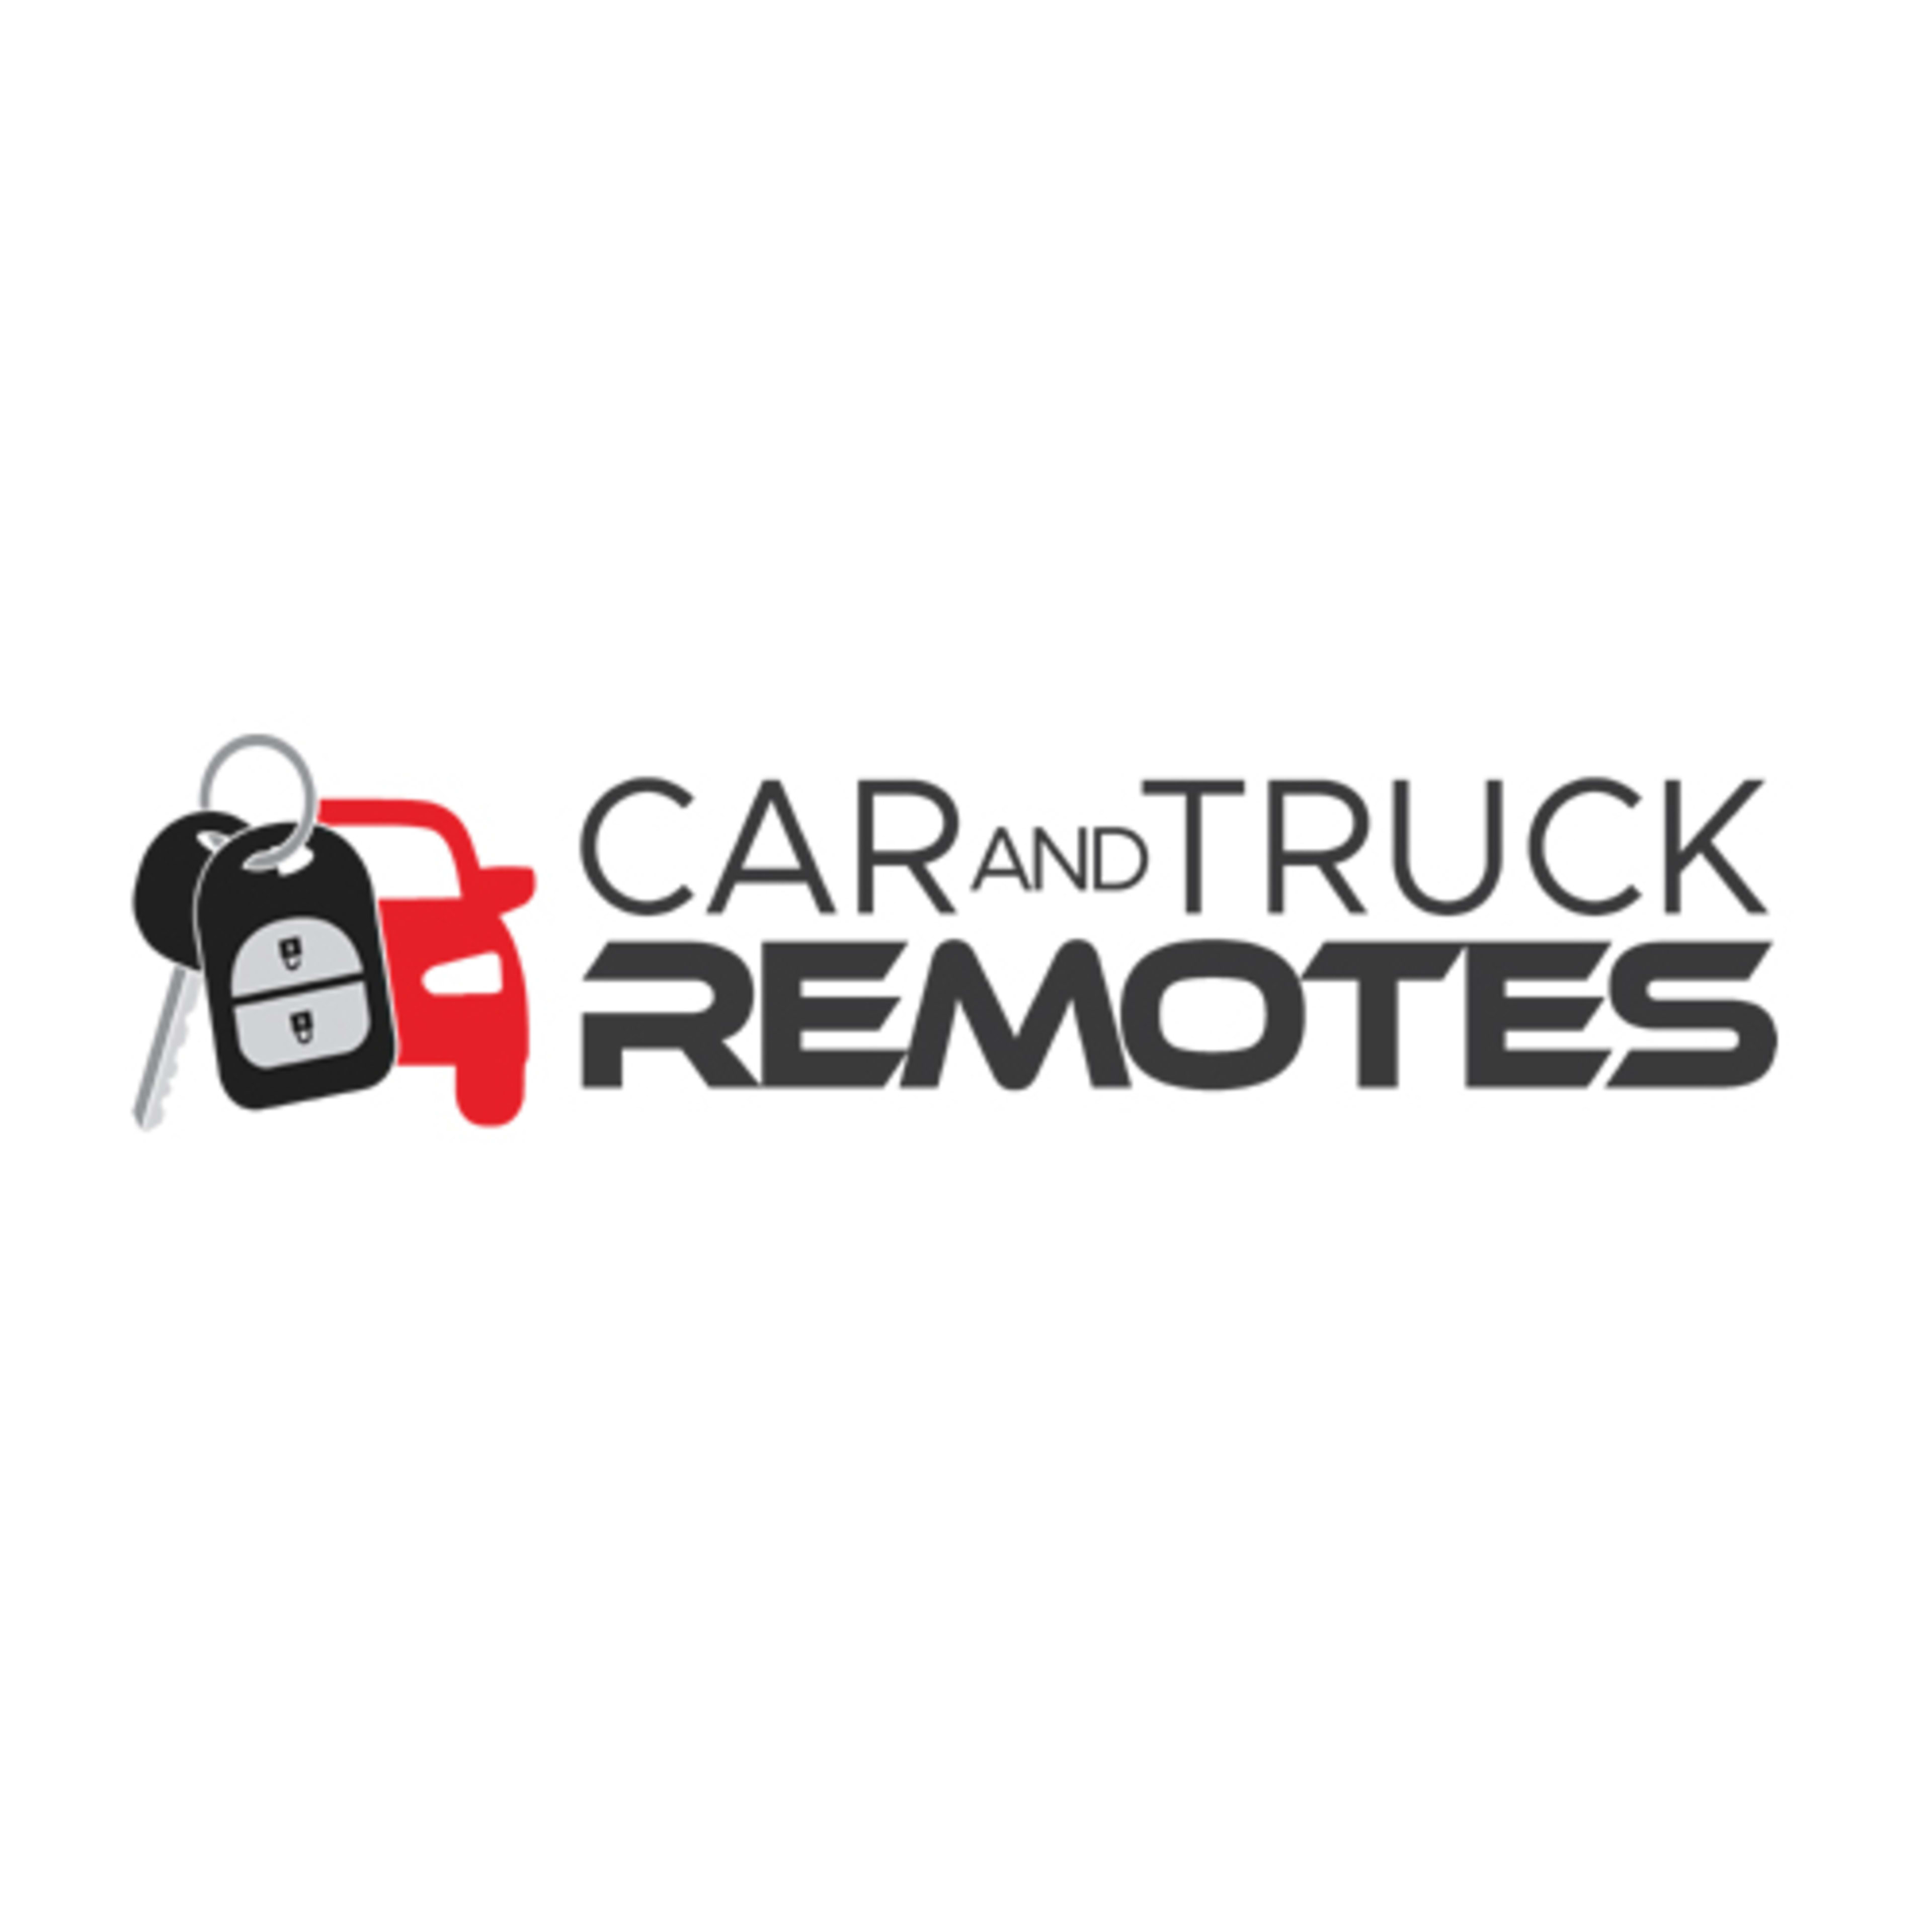 Car and Truck RemotesCode